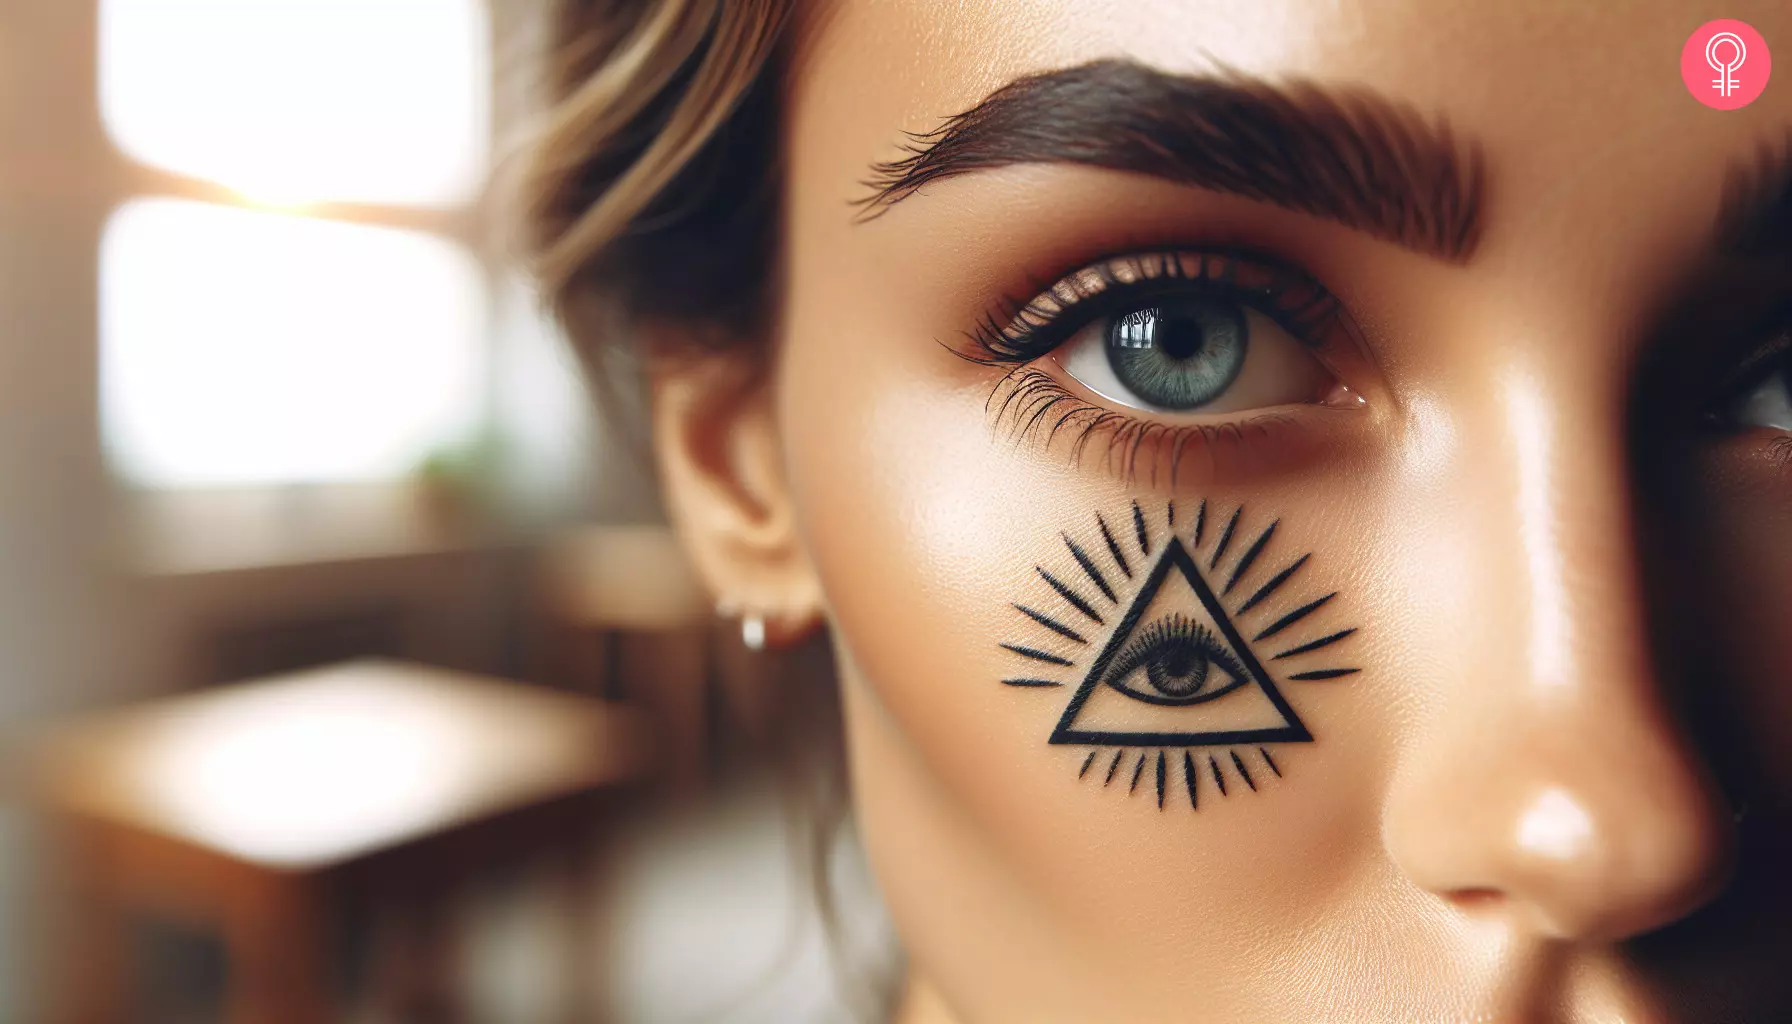 A woman with a triangle tattoo under her eye